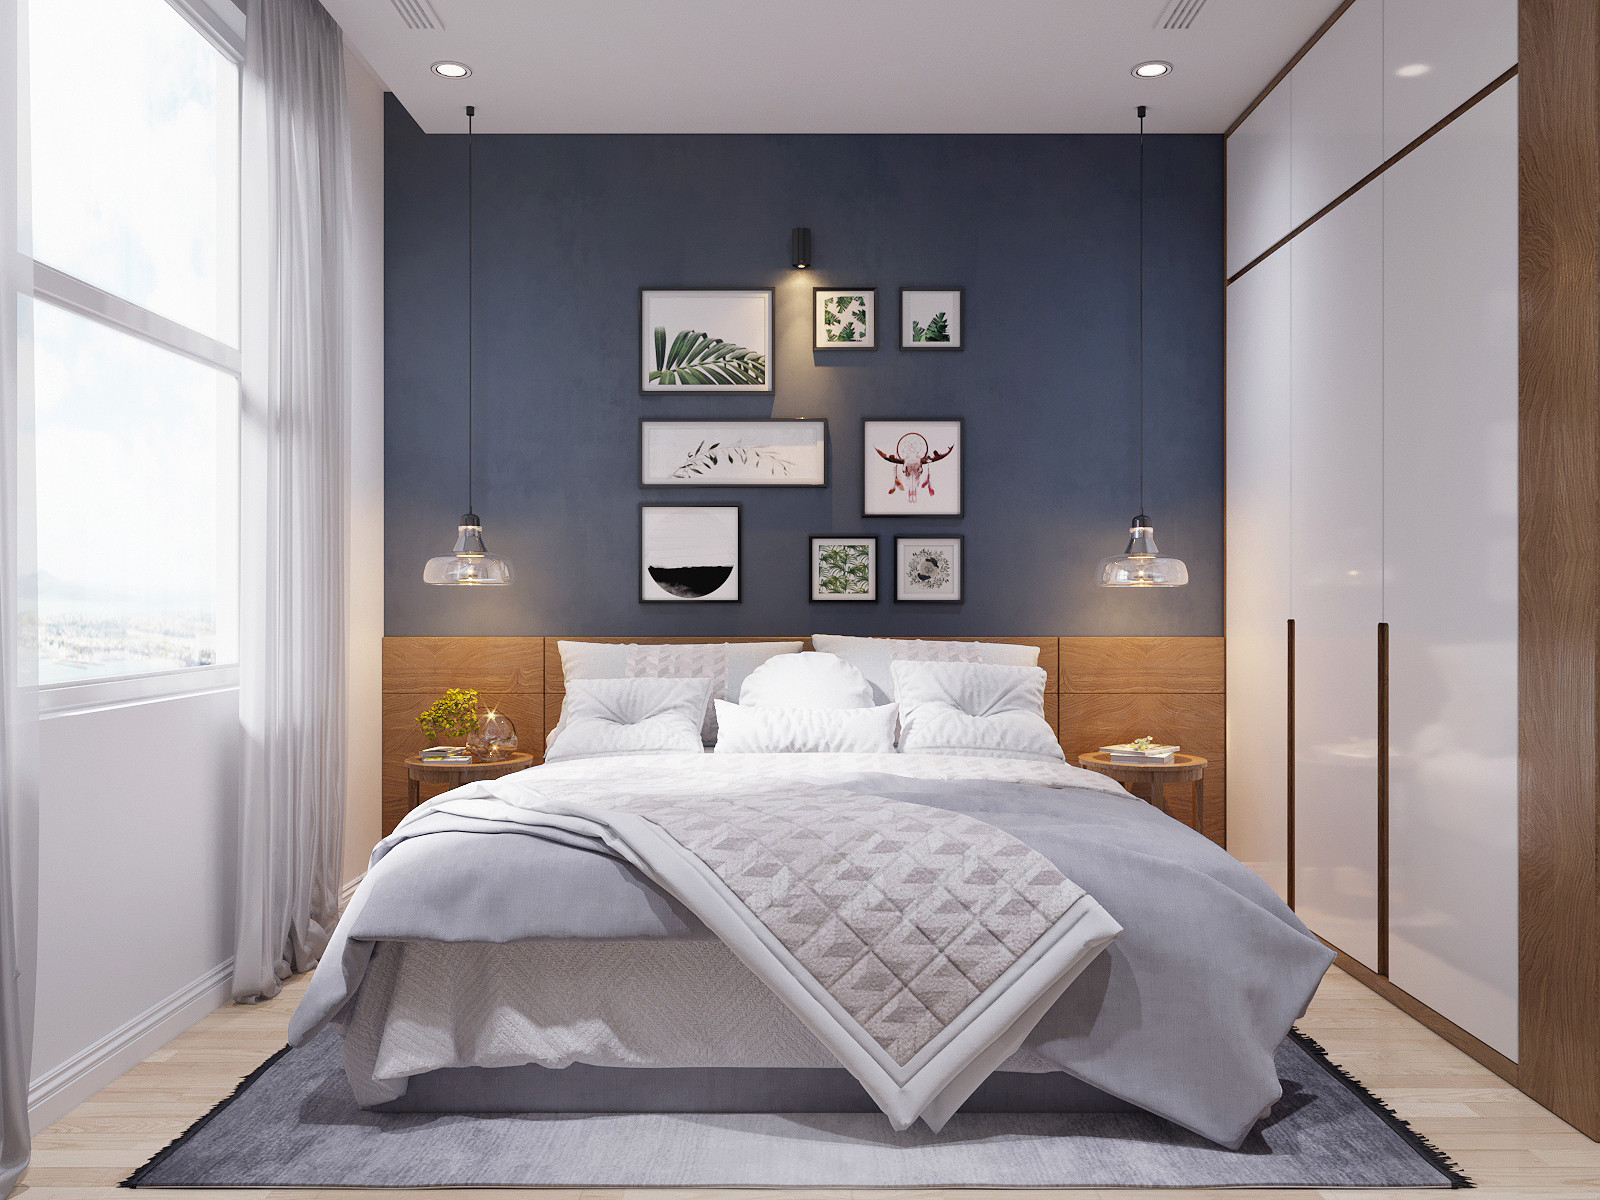 Blue Accent Wall Bedroom
 Modern Scandinavian Style Home Design For Young Families